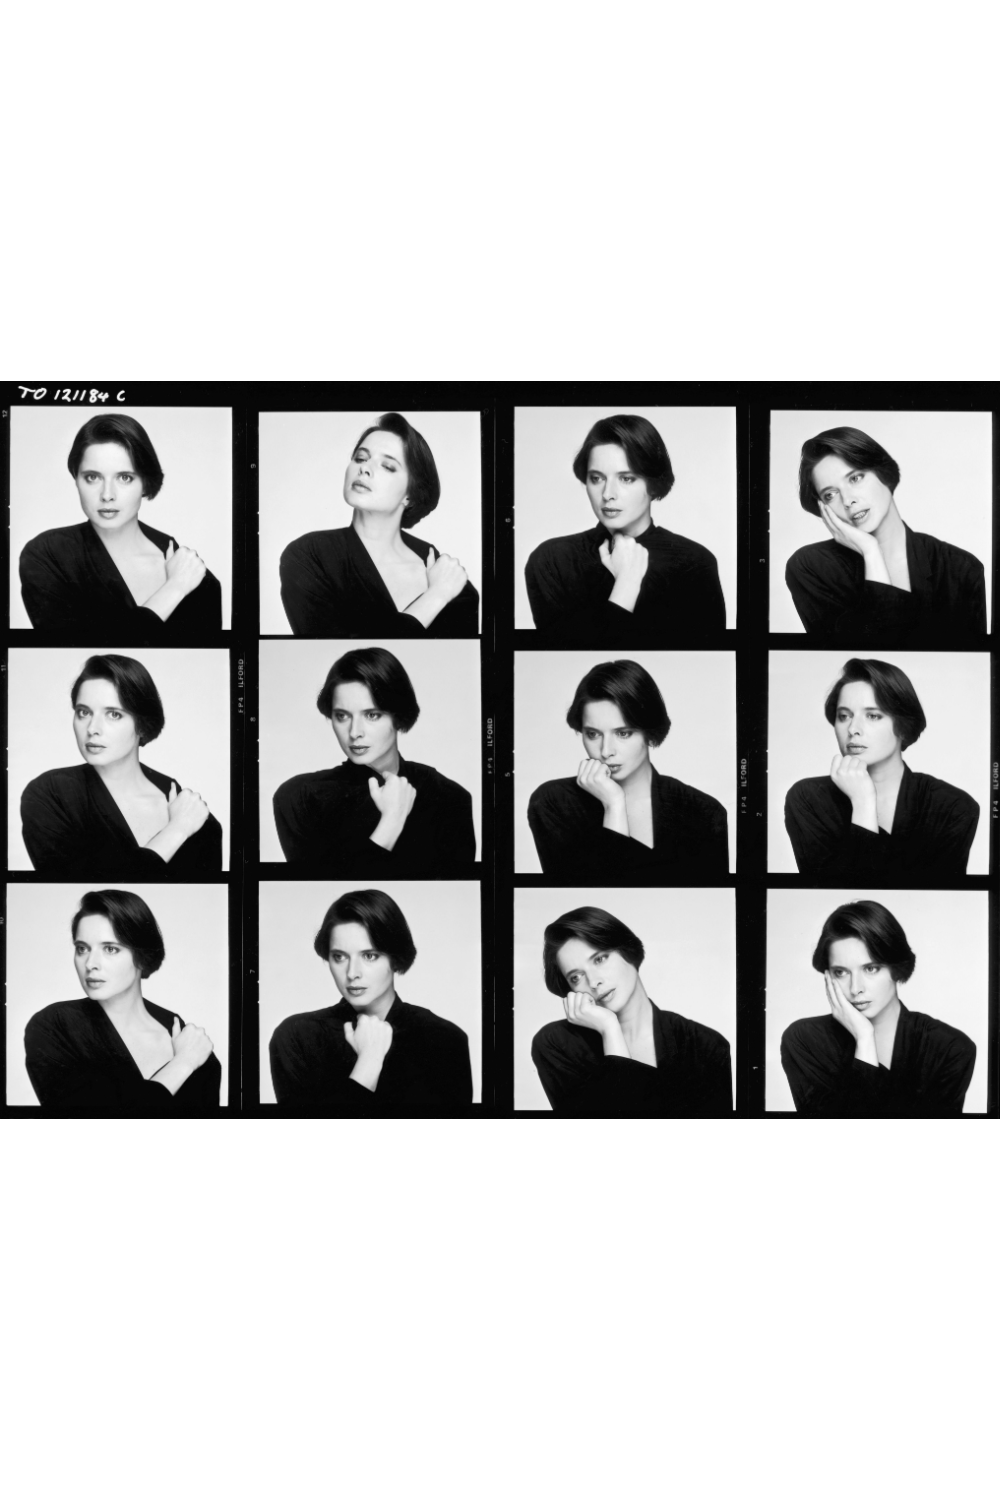 Isabella Rossellini Photographic Artwork | Andrew Martin Deep In Thought | Oroa.com